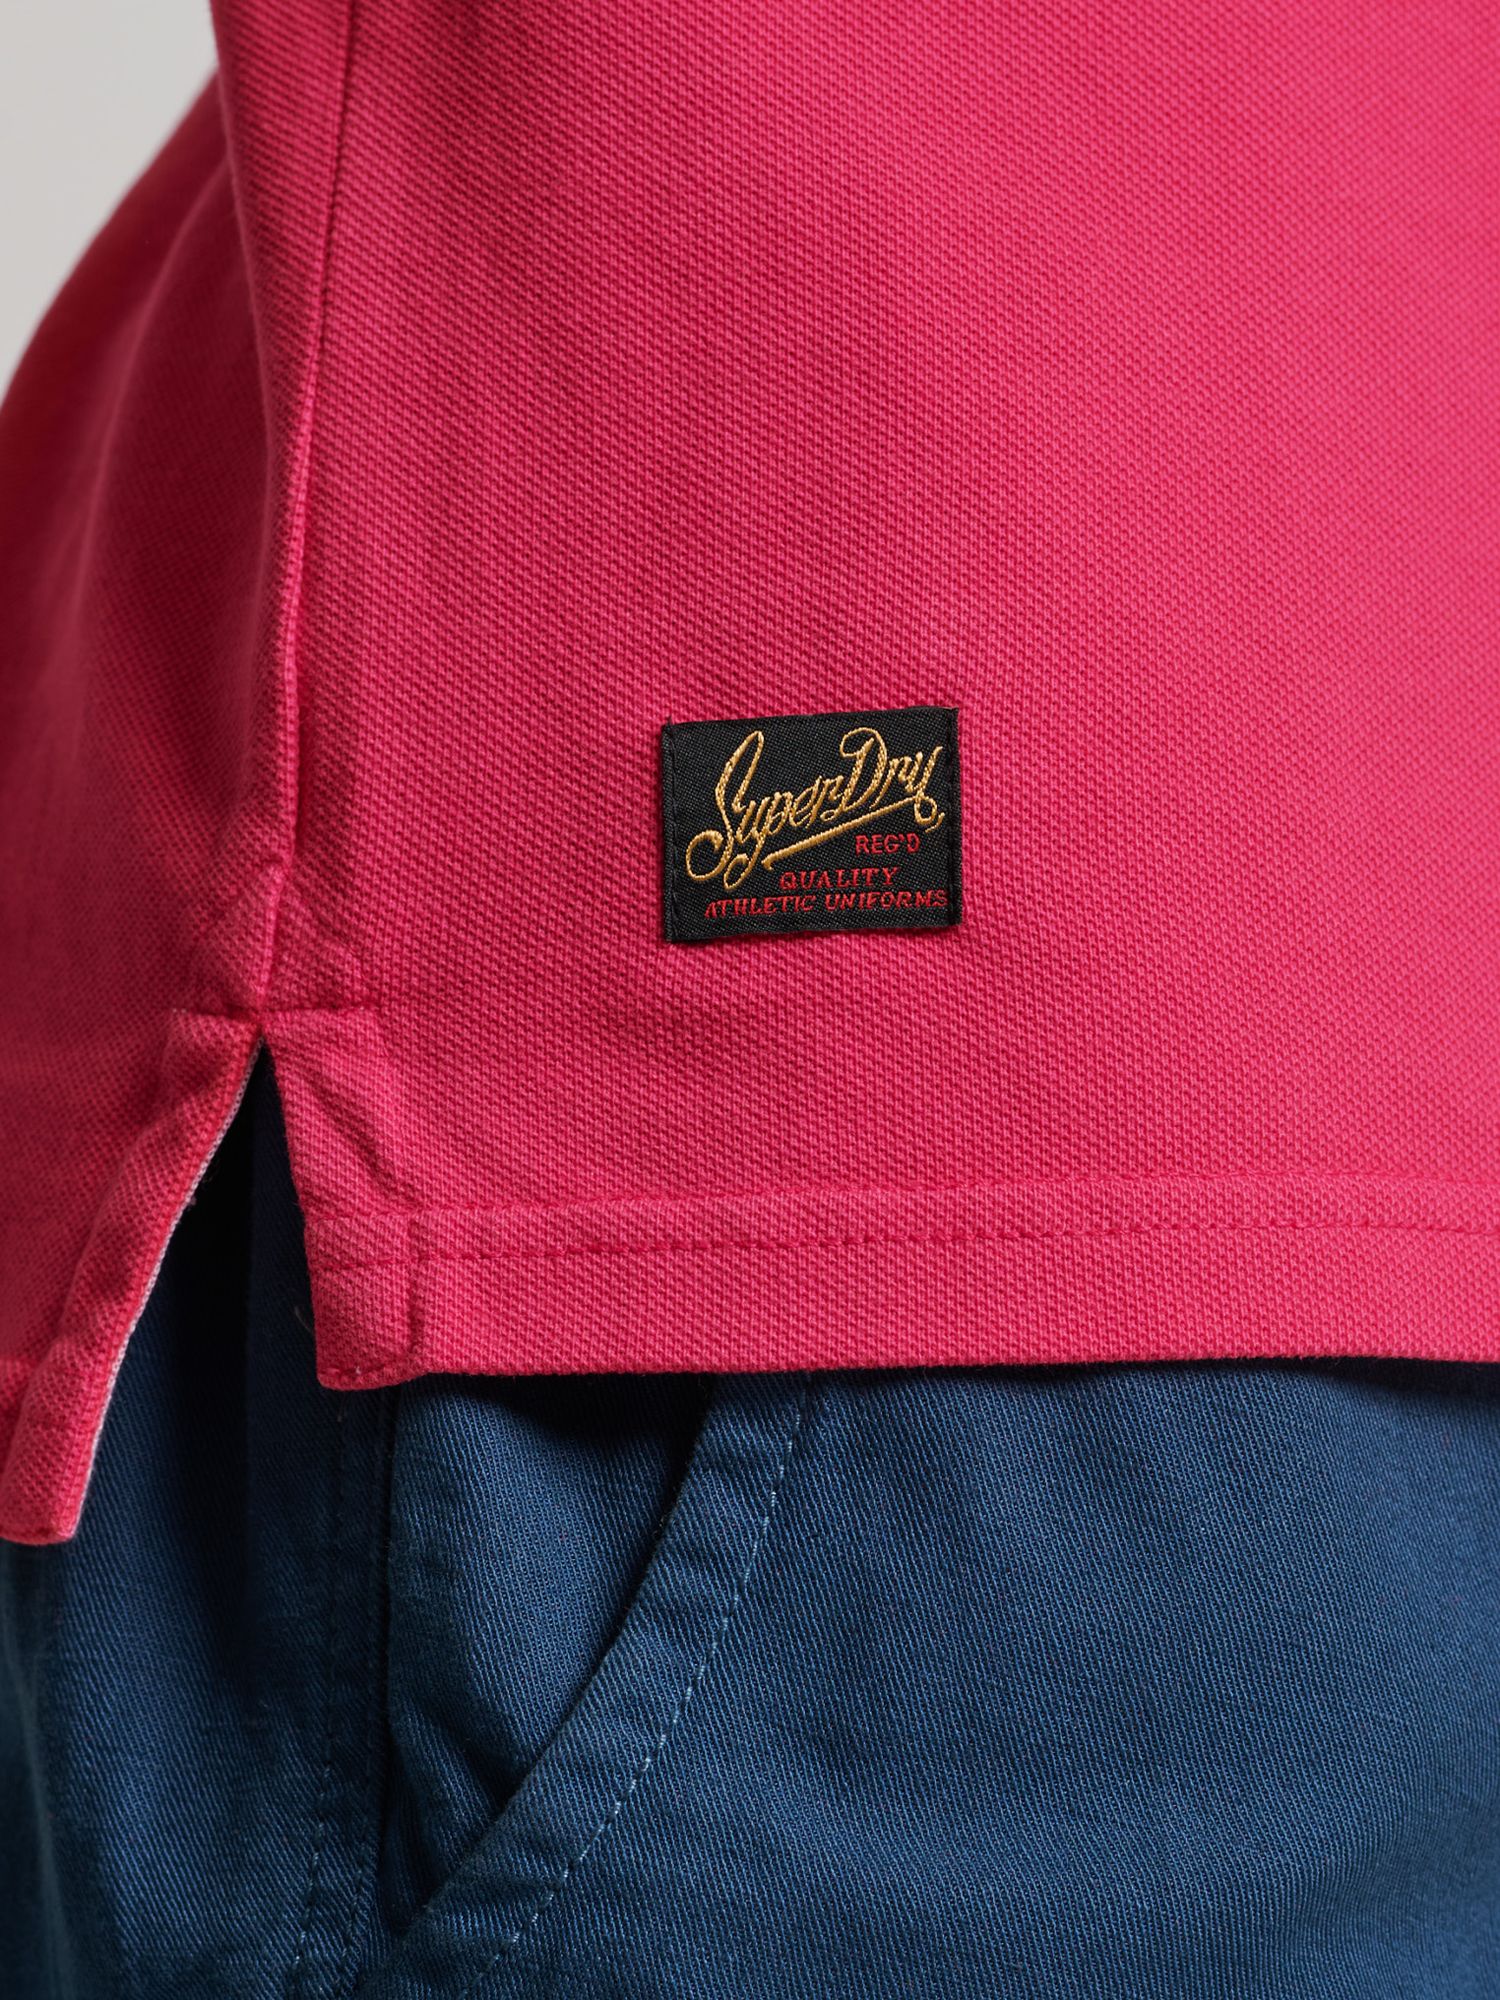 Superdry Superstate Polo Shirt, Raspberry Pink at John Lewis & Partners